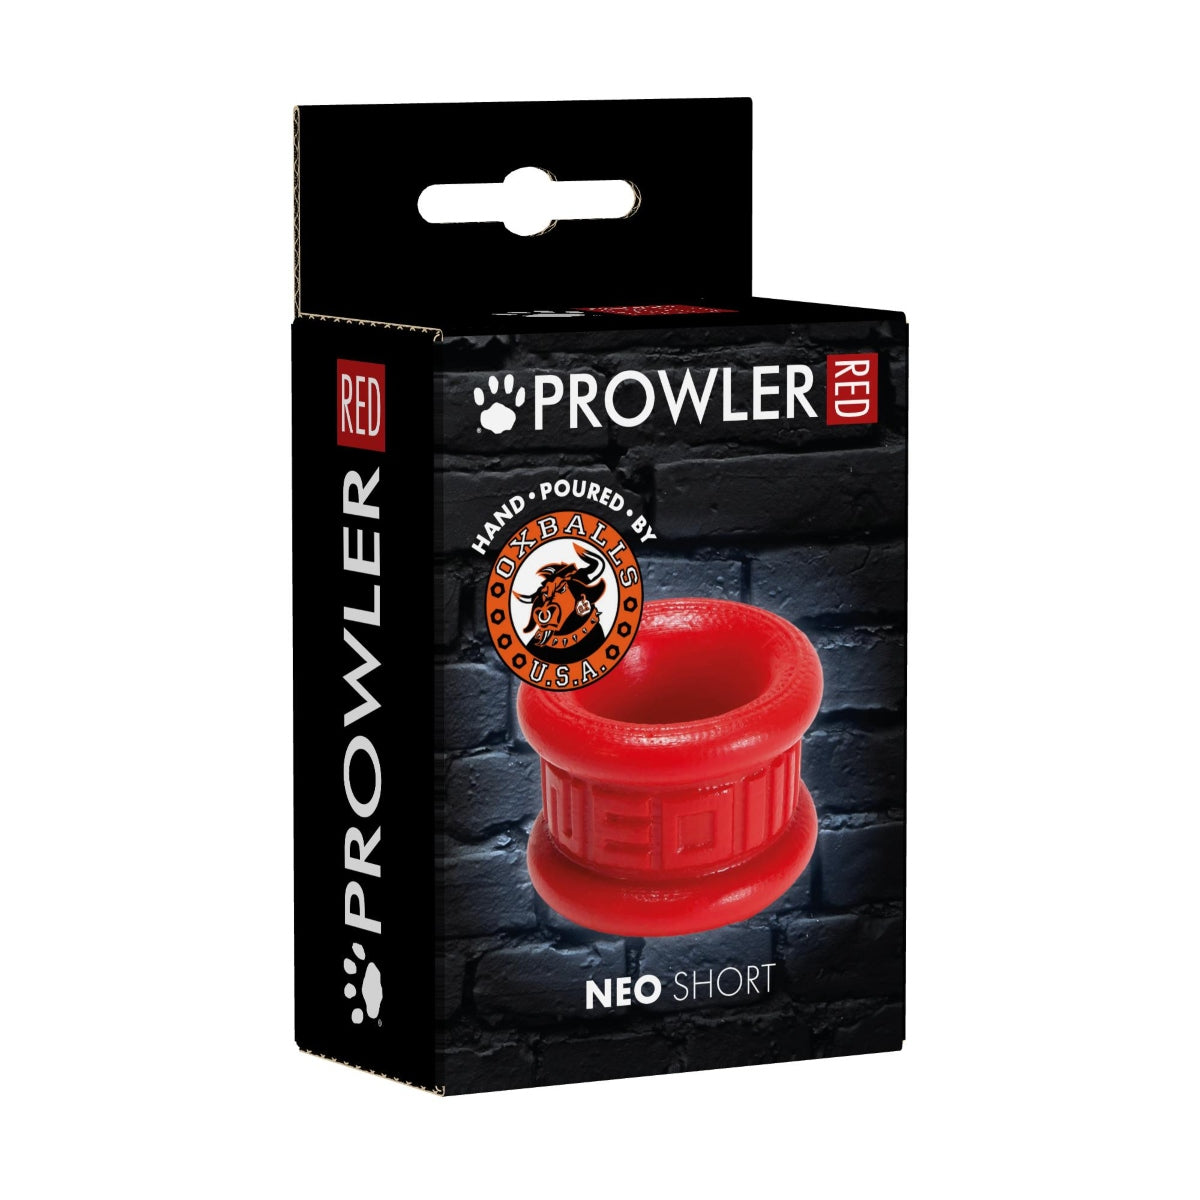 Prowler RED NEO SHORT by Oxballs Red (8070308692207)